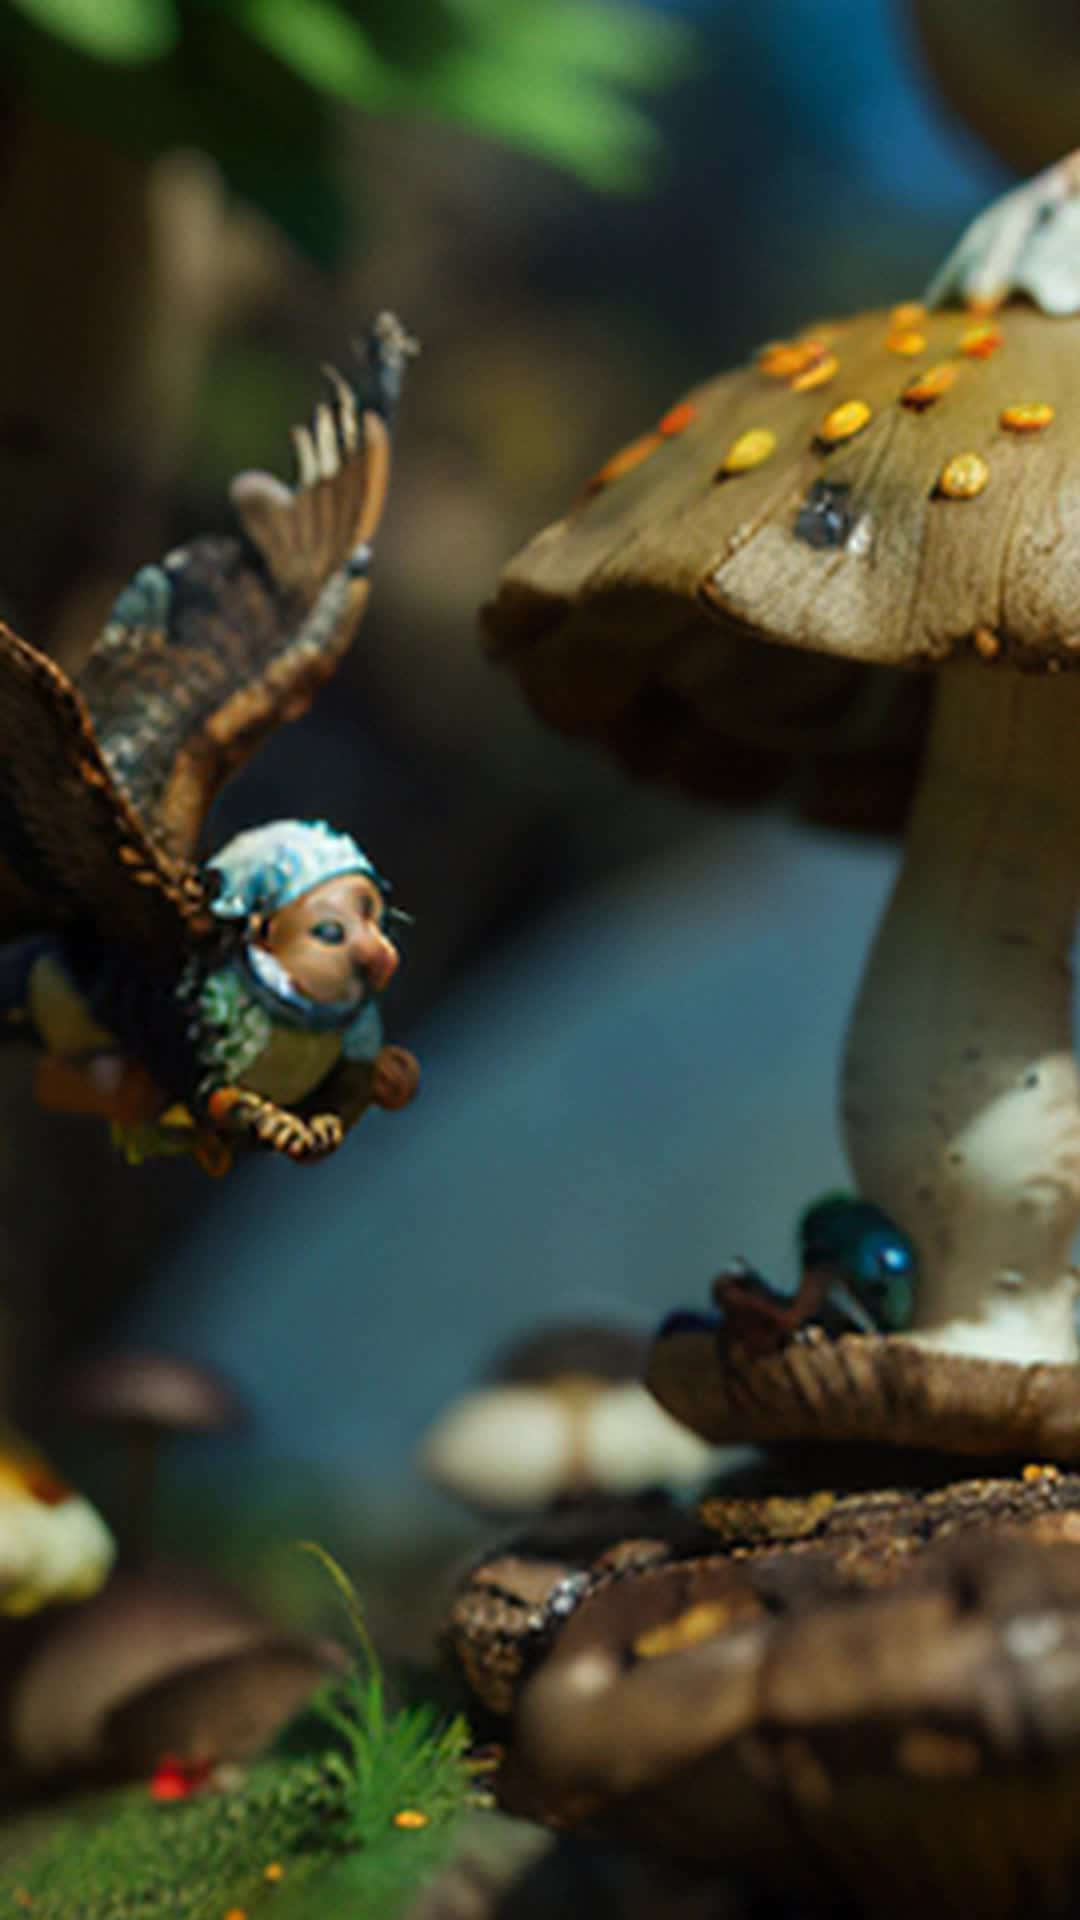 Agile gnome hopping onto colorful mushroom, leaping towards sturdy branch, hawk making second dive, suspenseful, action-packed, mushroom detailed with rich reds and whites, soft shadows, excellent focus